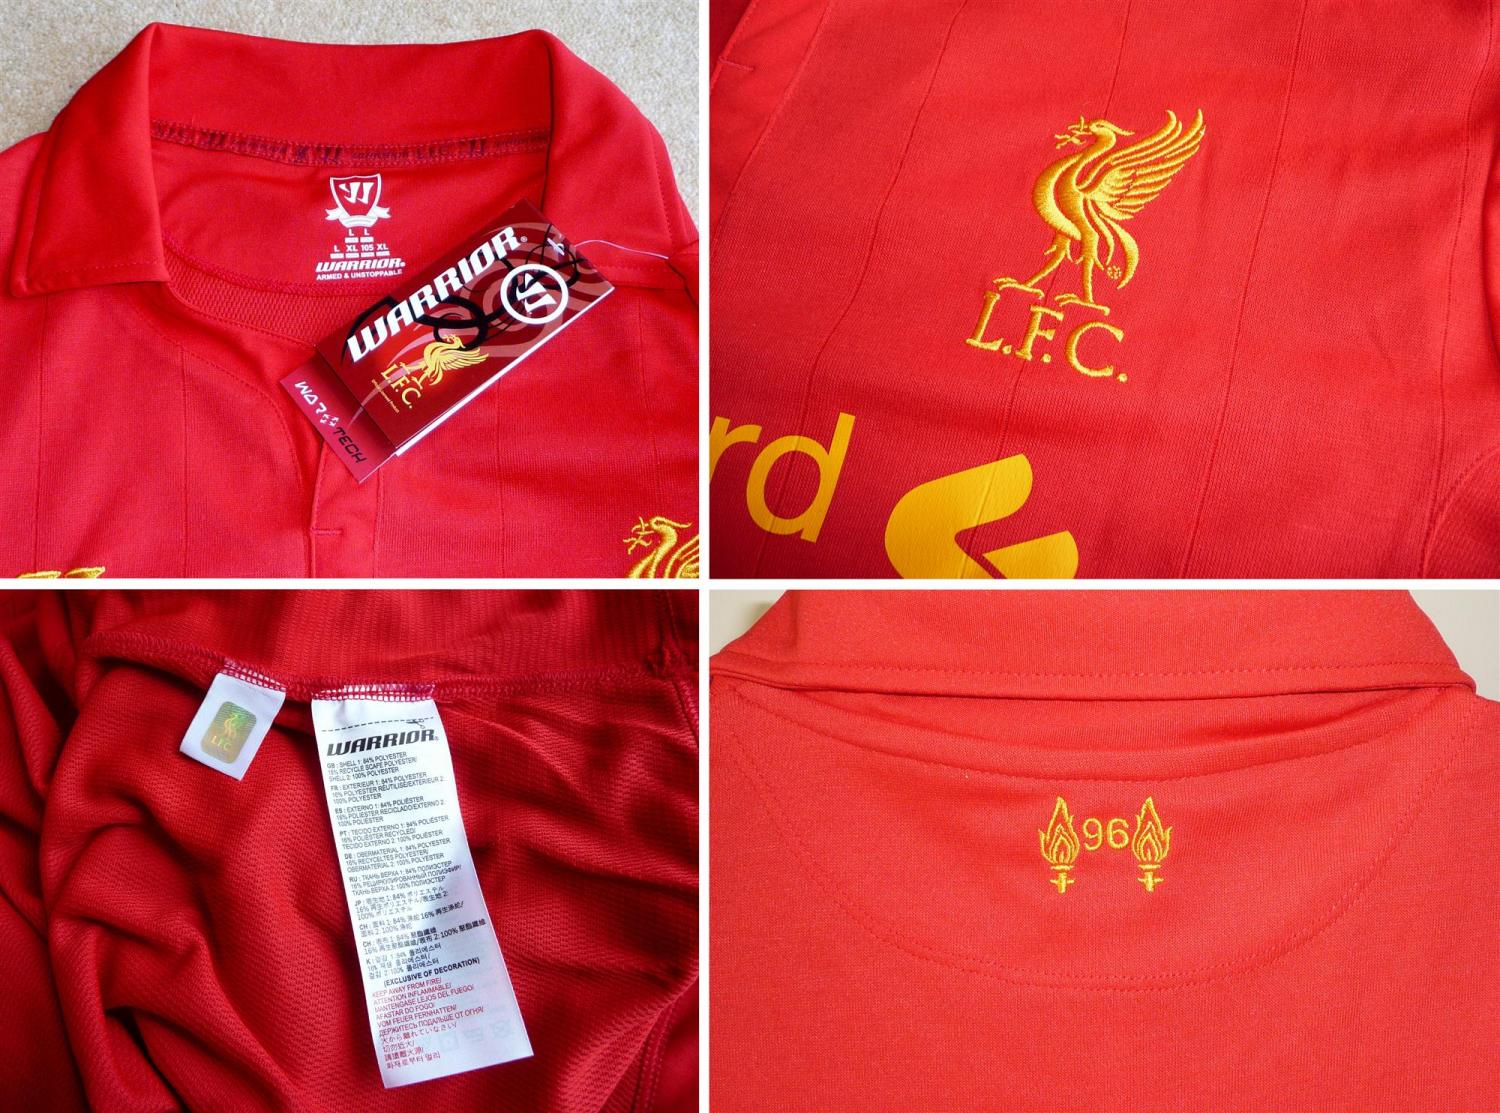 Liverpool Home football shirt 2012 - 2013. Sponsored by Standard Chartered